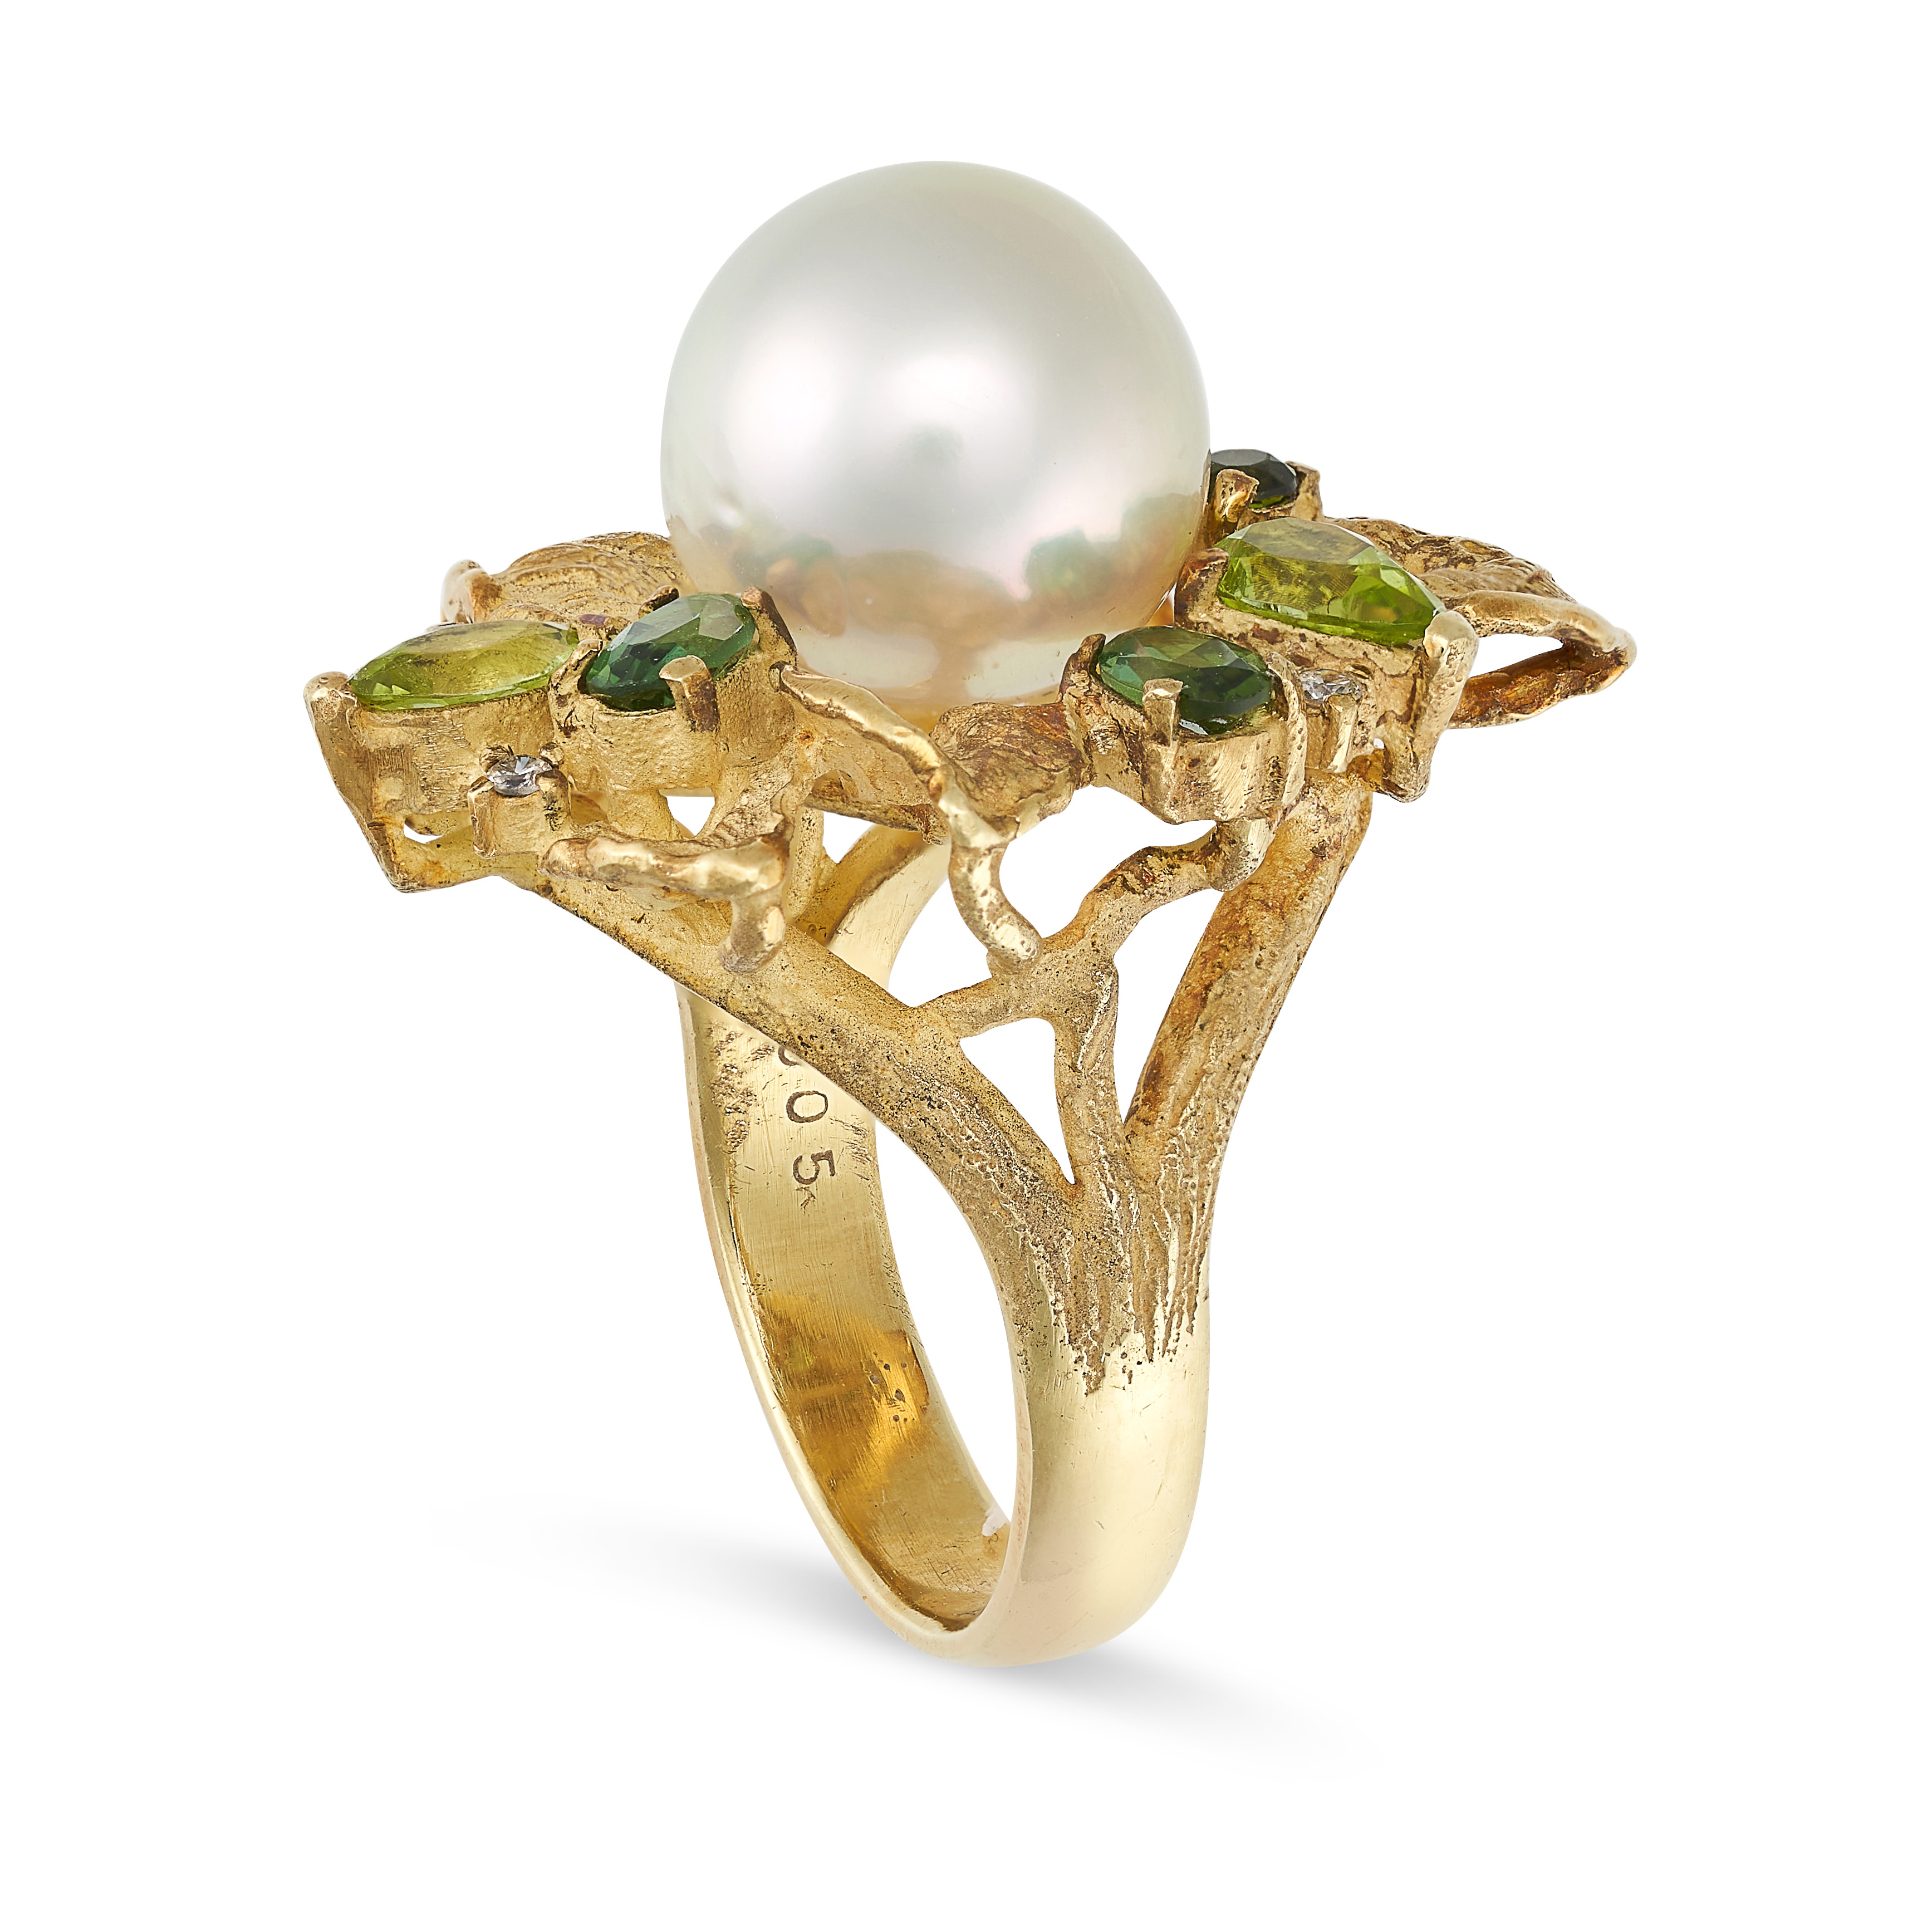 A PEARL, DIAMOND, TOURMALINE AND PERIDOT RING in 18ct yellow gold, designed as a stylised flower,... - Image 2 of 4